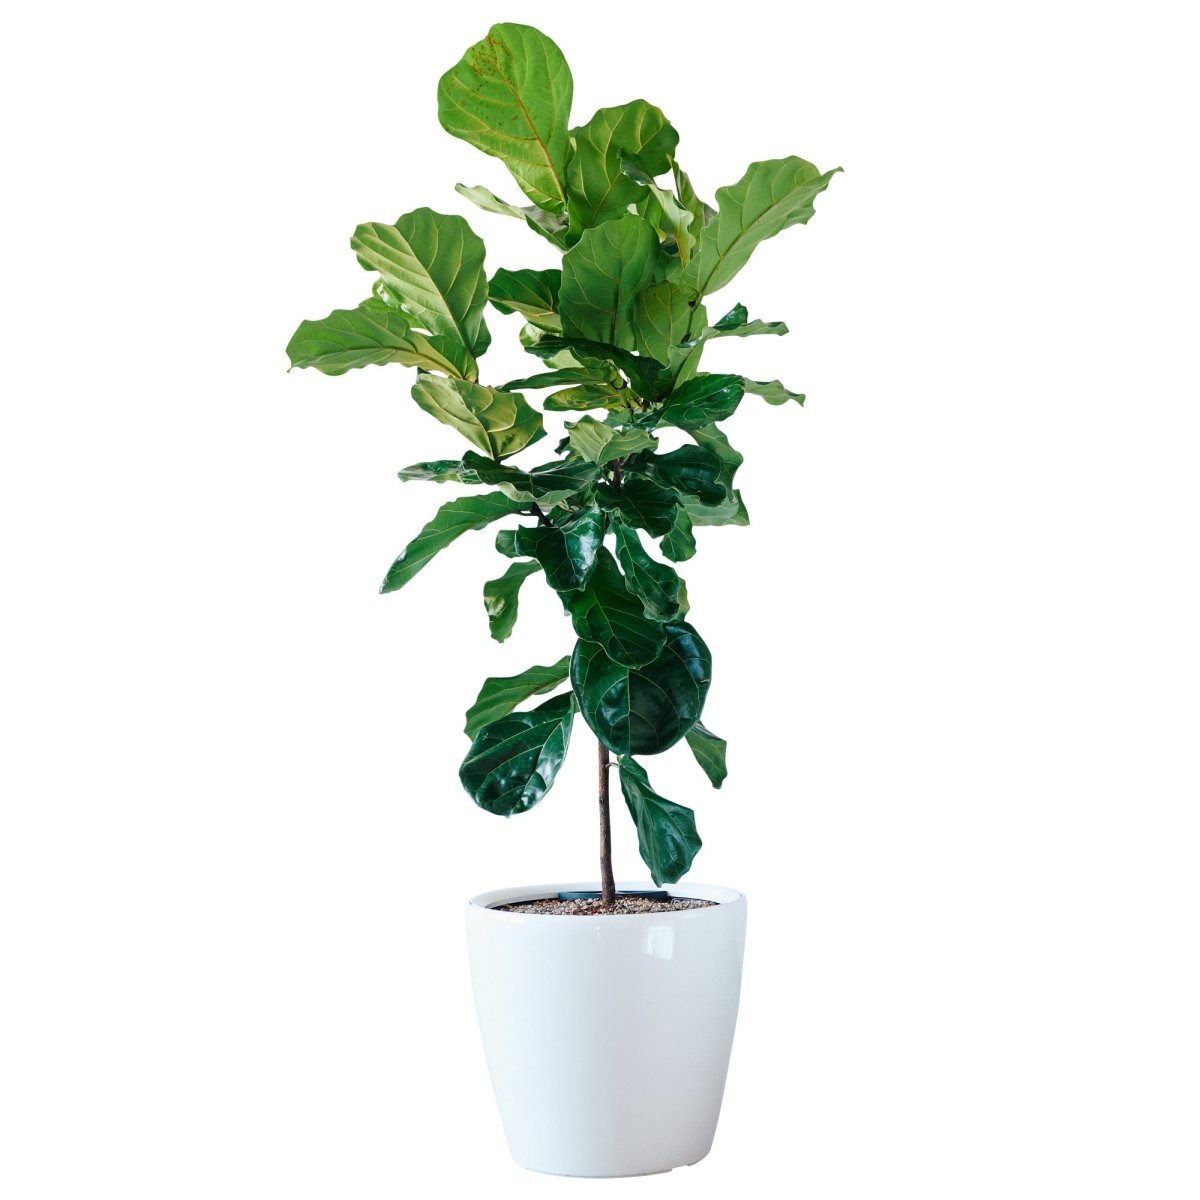 Fiddle Leaf Fig Tree Potted In Lechuza Classico 50 Planter - White - My City Plants